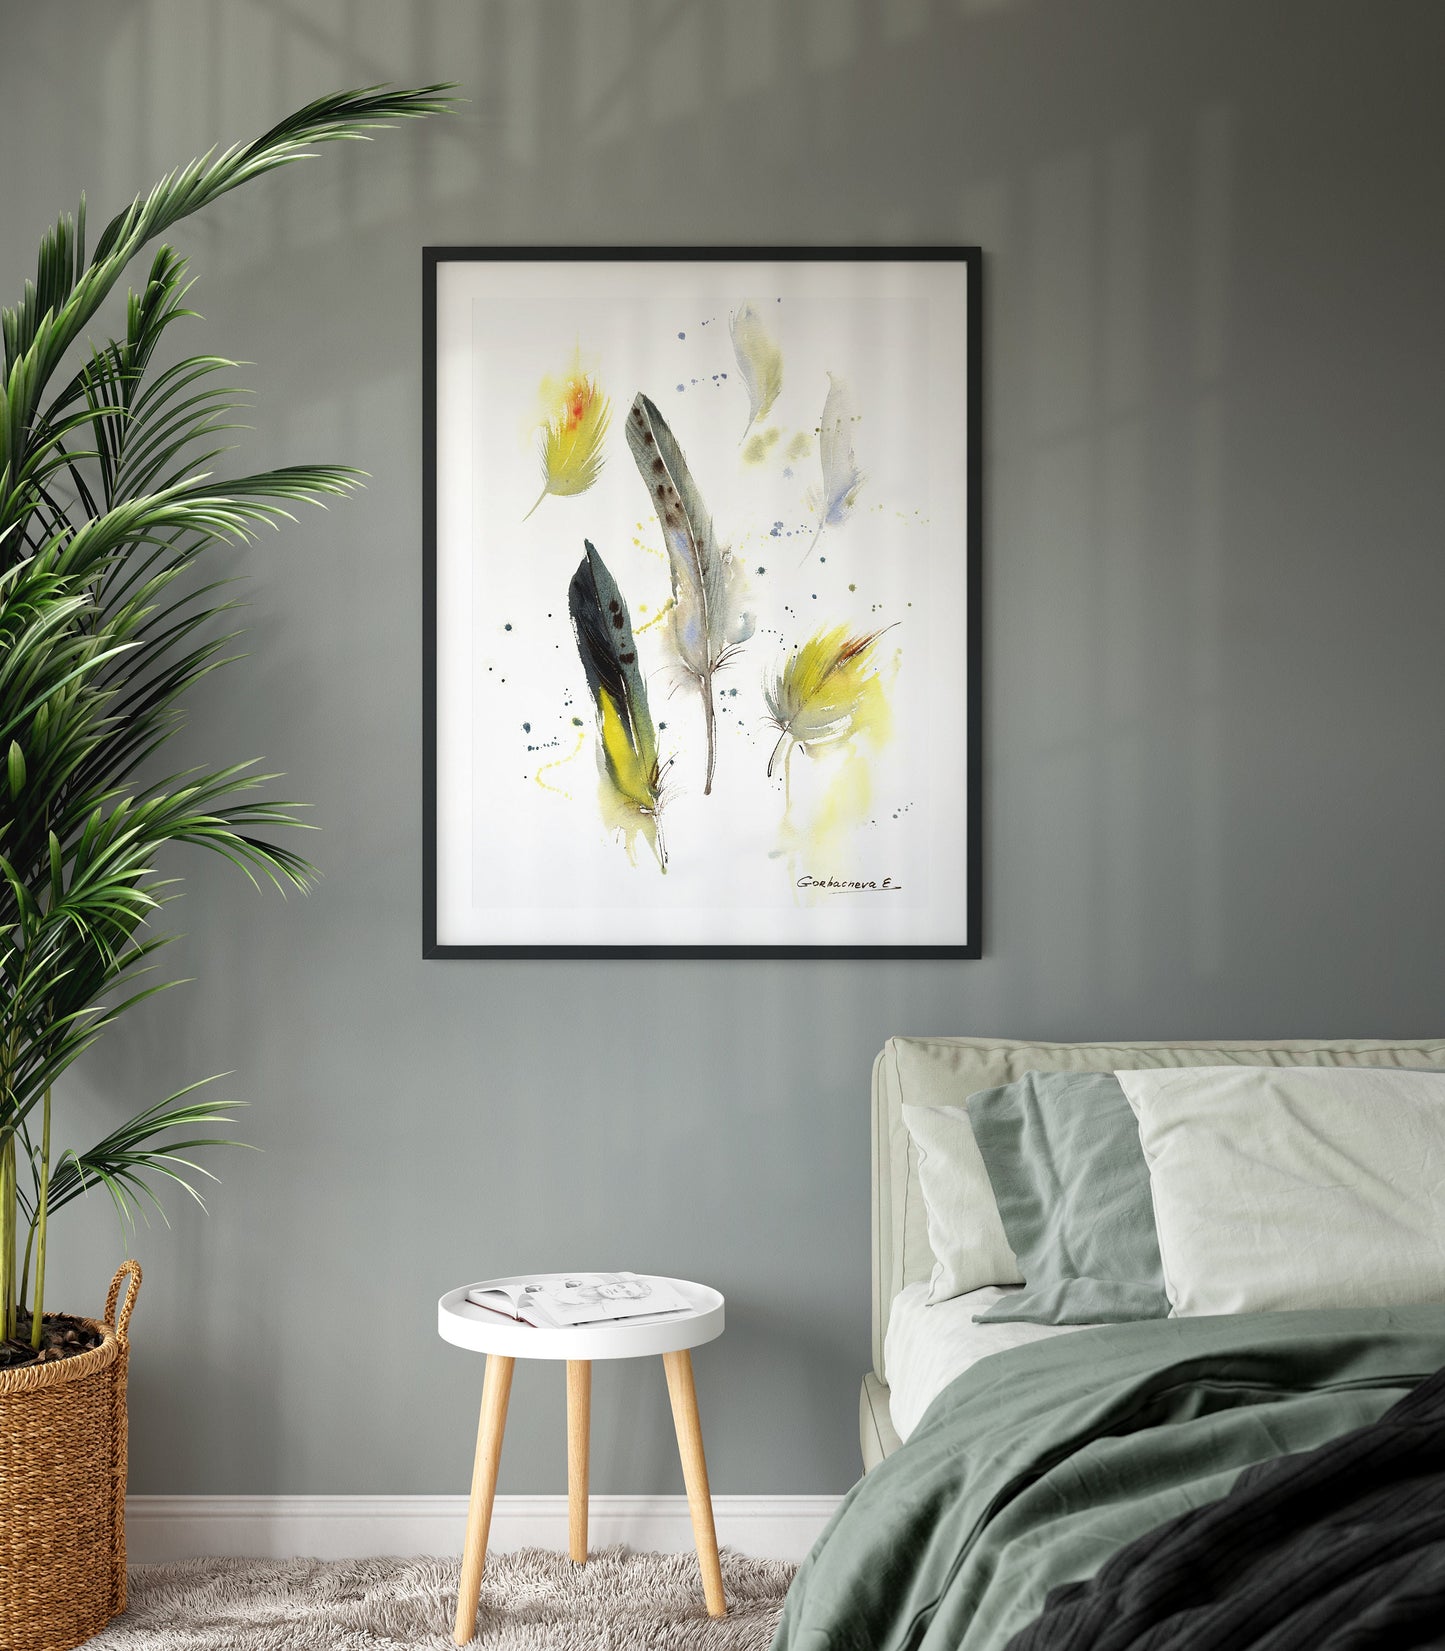 Yellow Gray Feather Art Print, Birds Flying of a Feather Art, Home Wall Decor, Minimalist Parrot Birds, Giclee Canvas